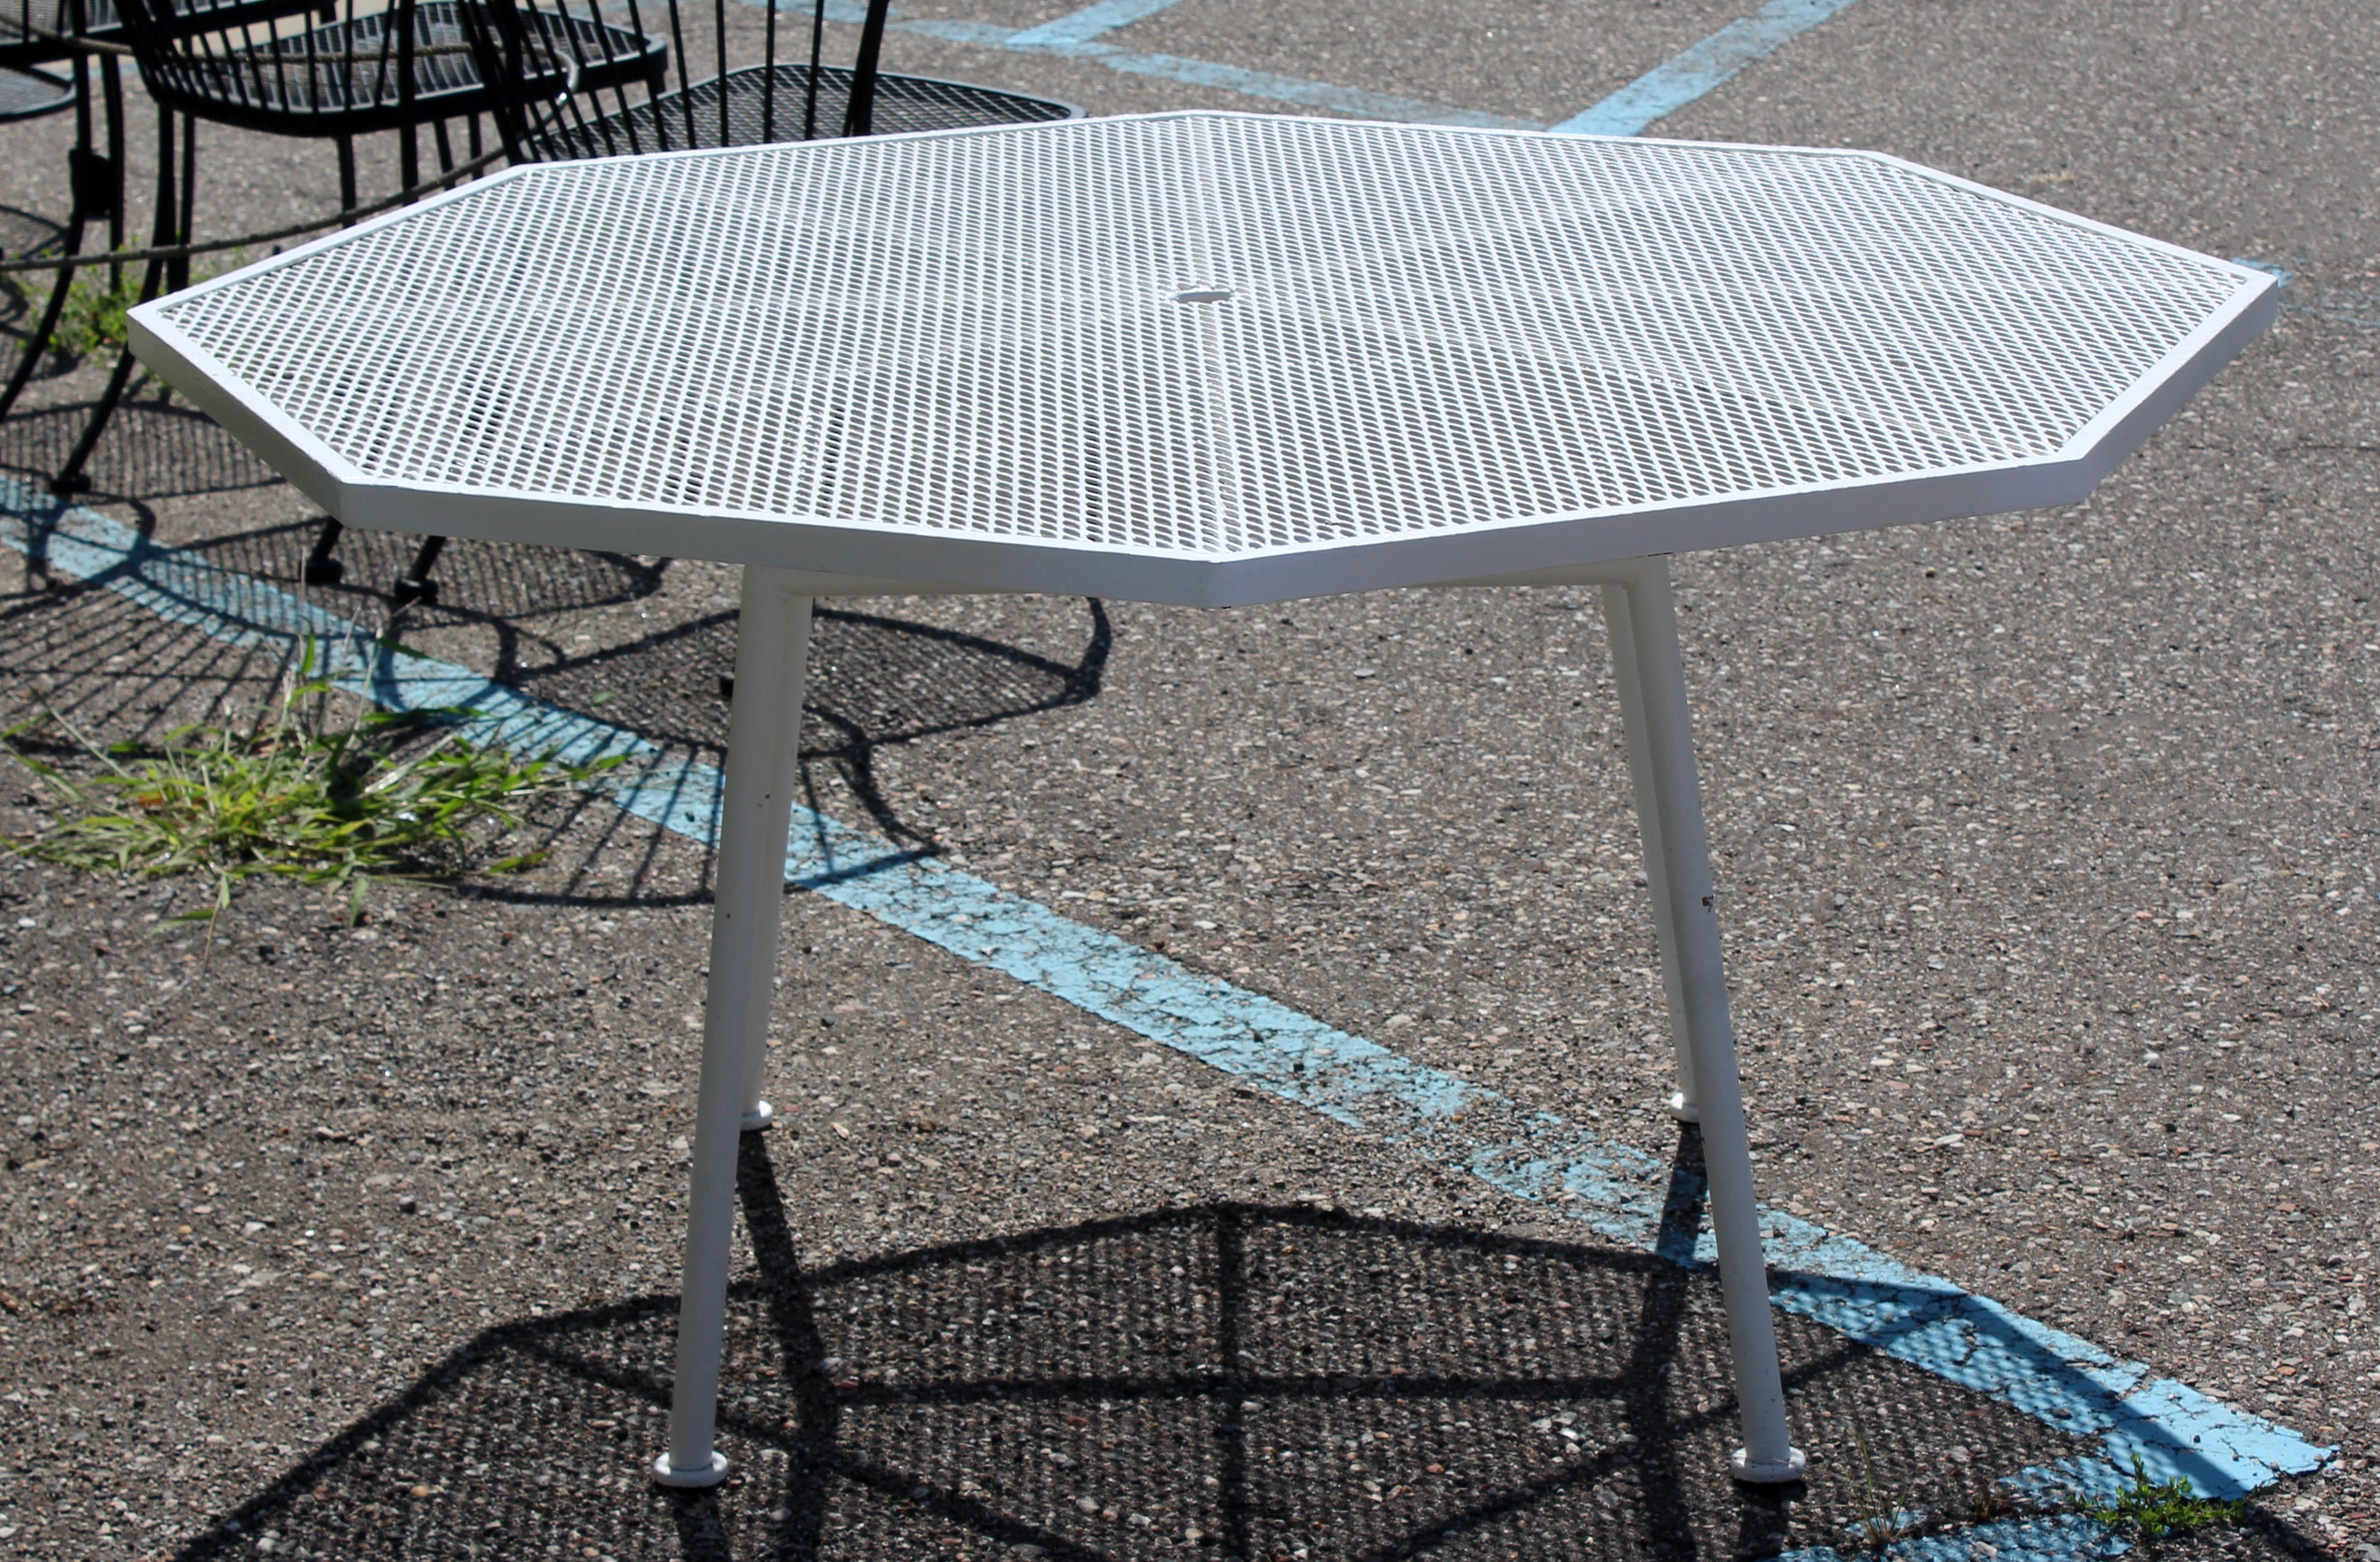 For your consideration is a fantastic, outdoor dining dinette, white iron, octagon table, by Russell Woodard, circa 1960s. In very good vintage condition. The dimensions are 52